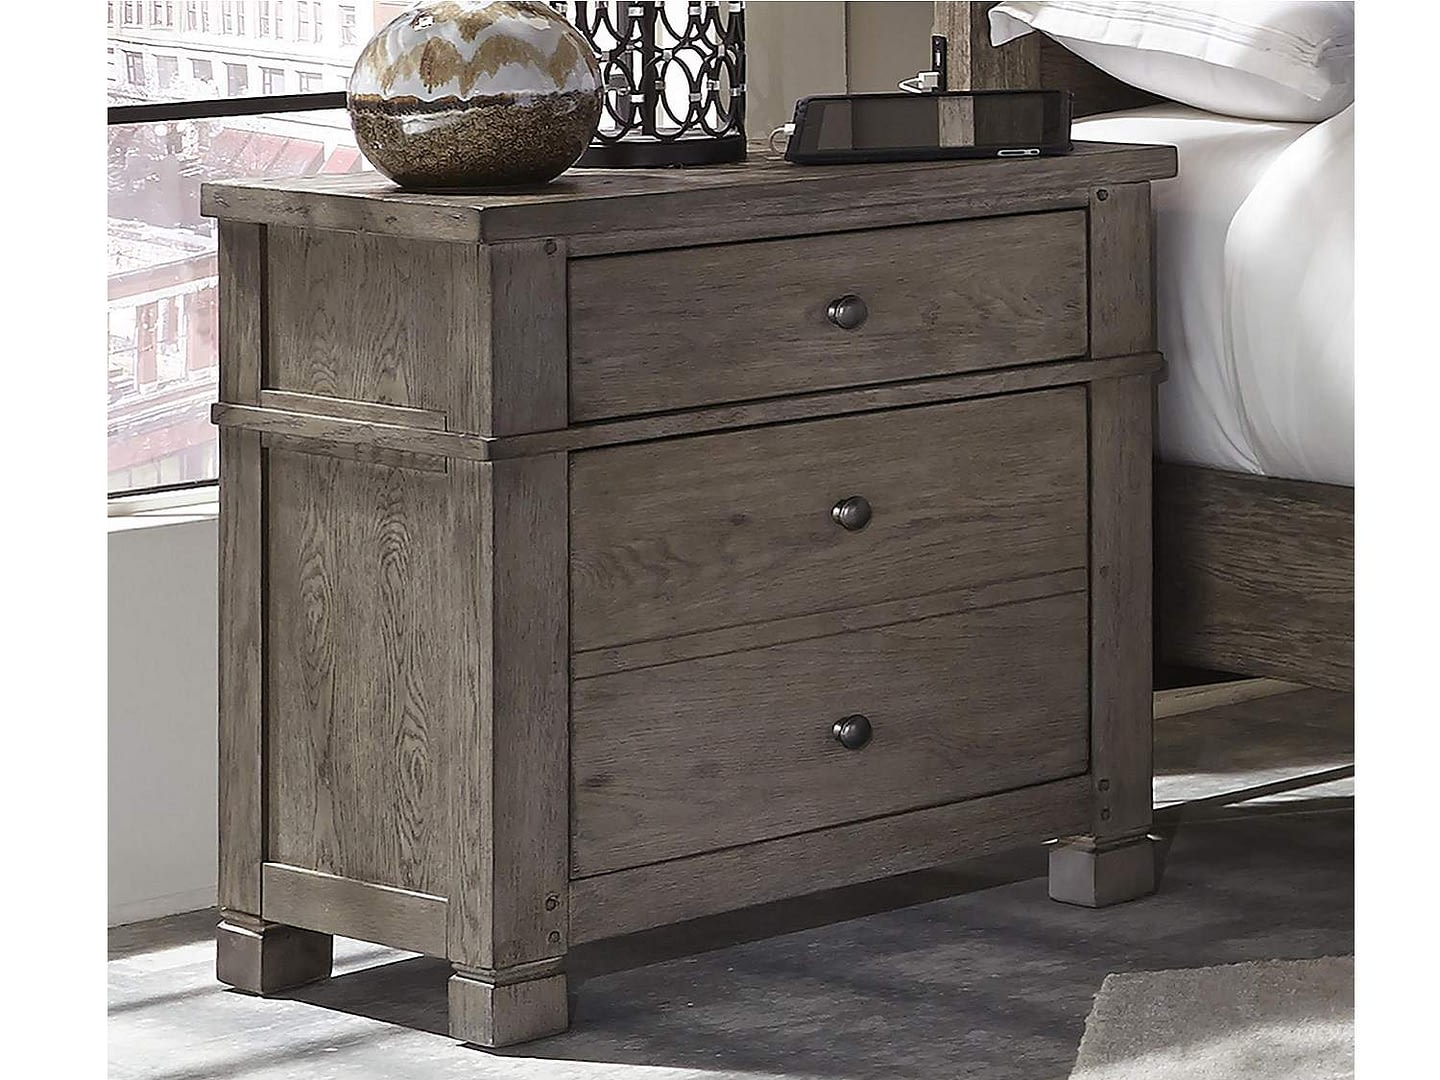 SUMTER Nightstand with Drawers - Zoom